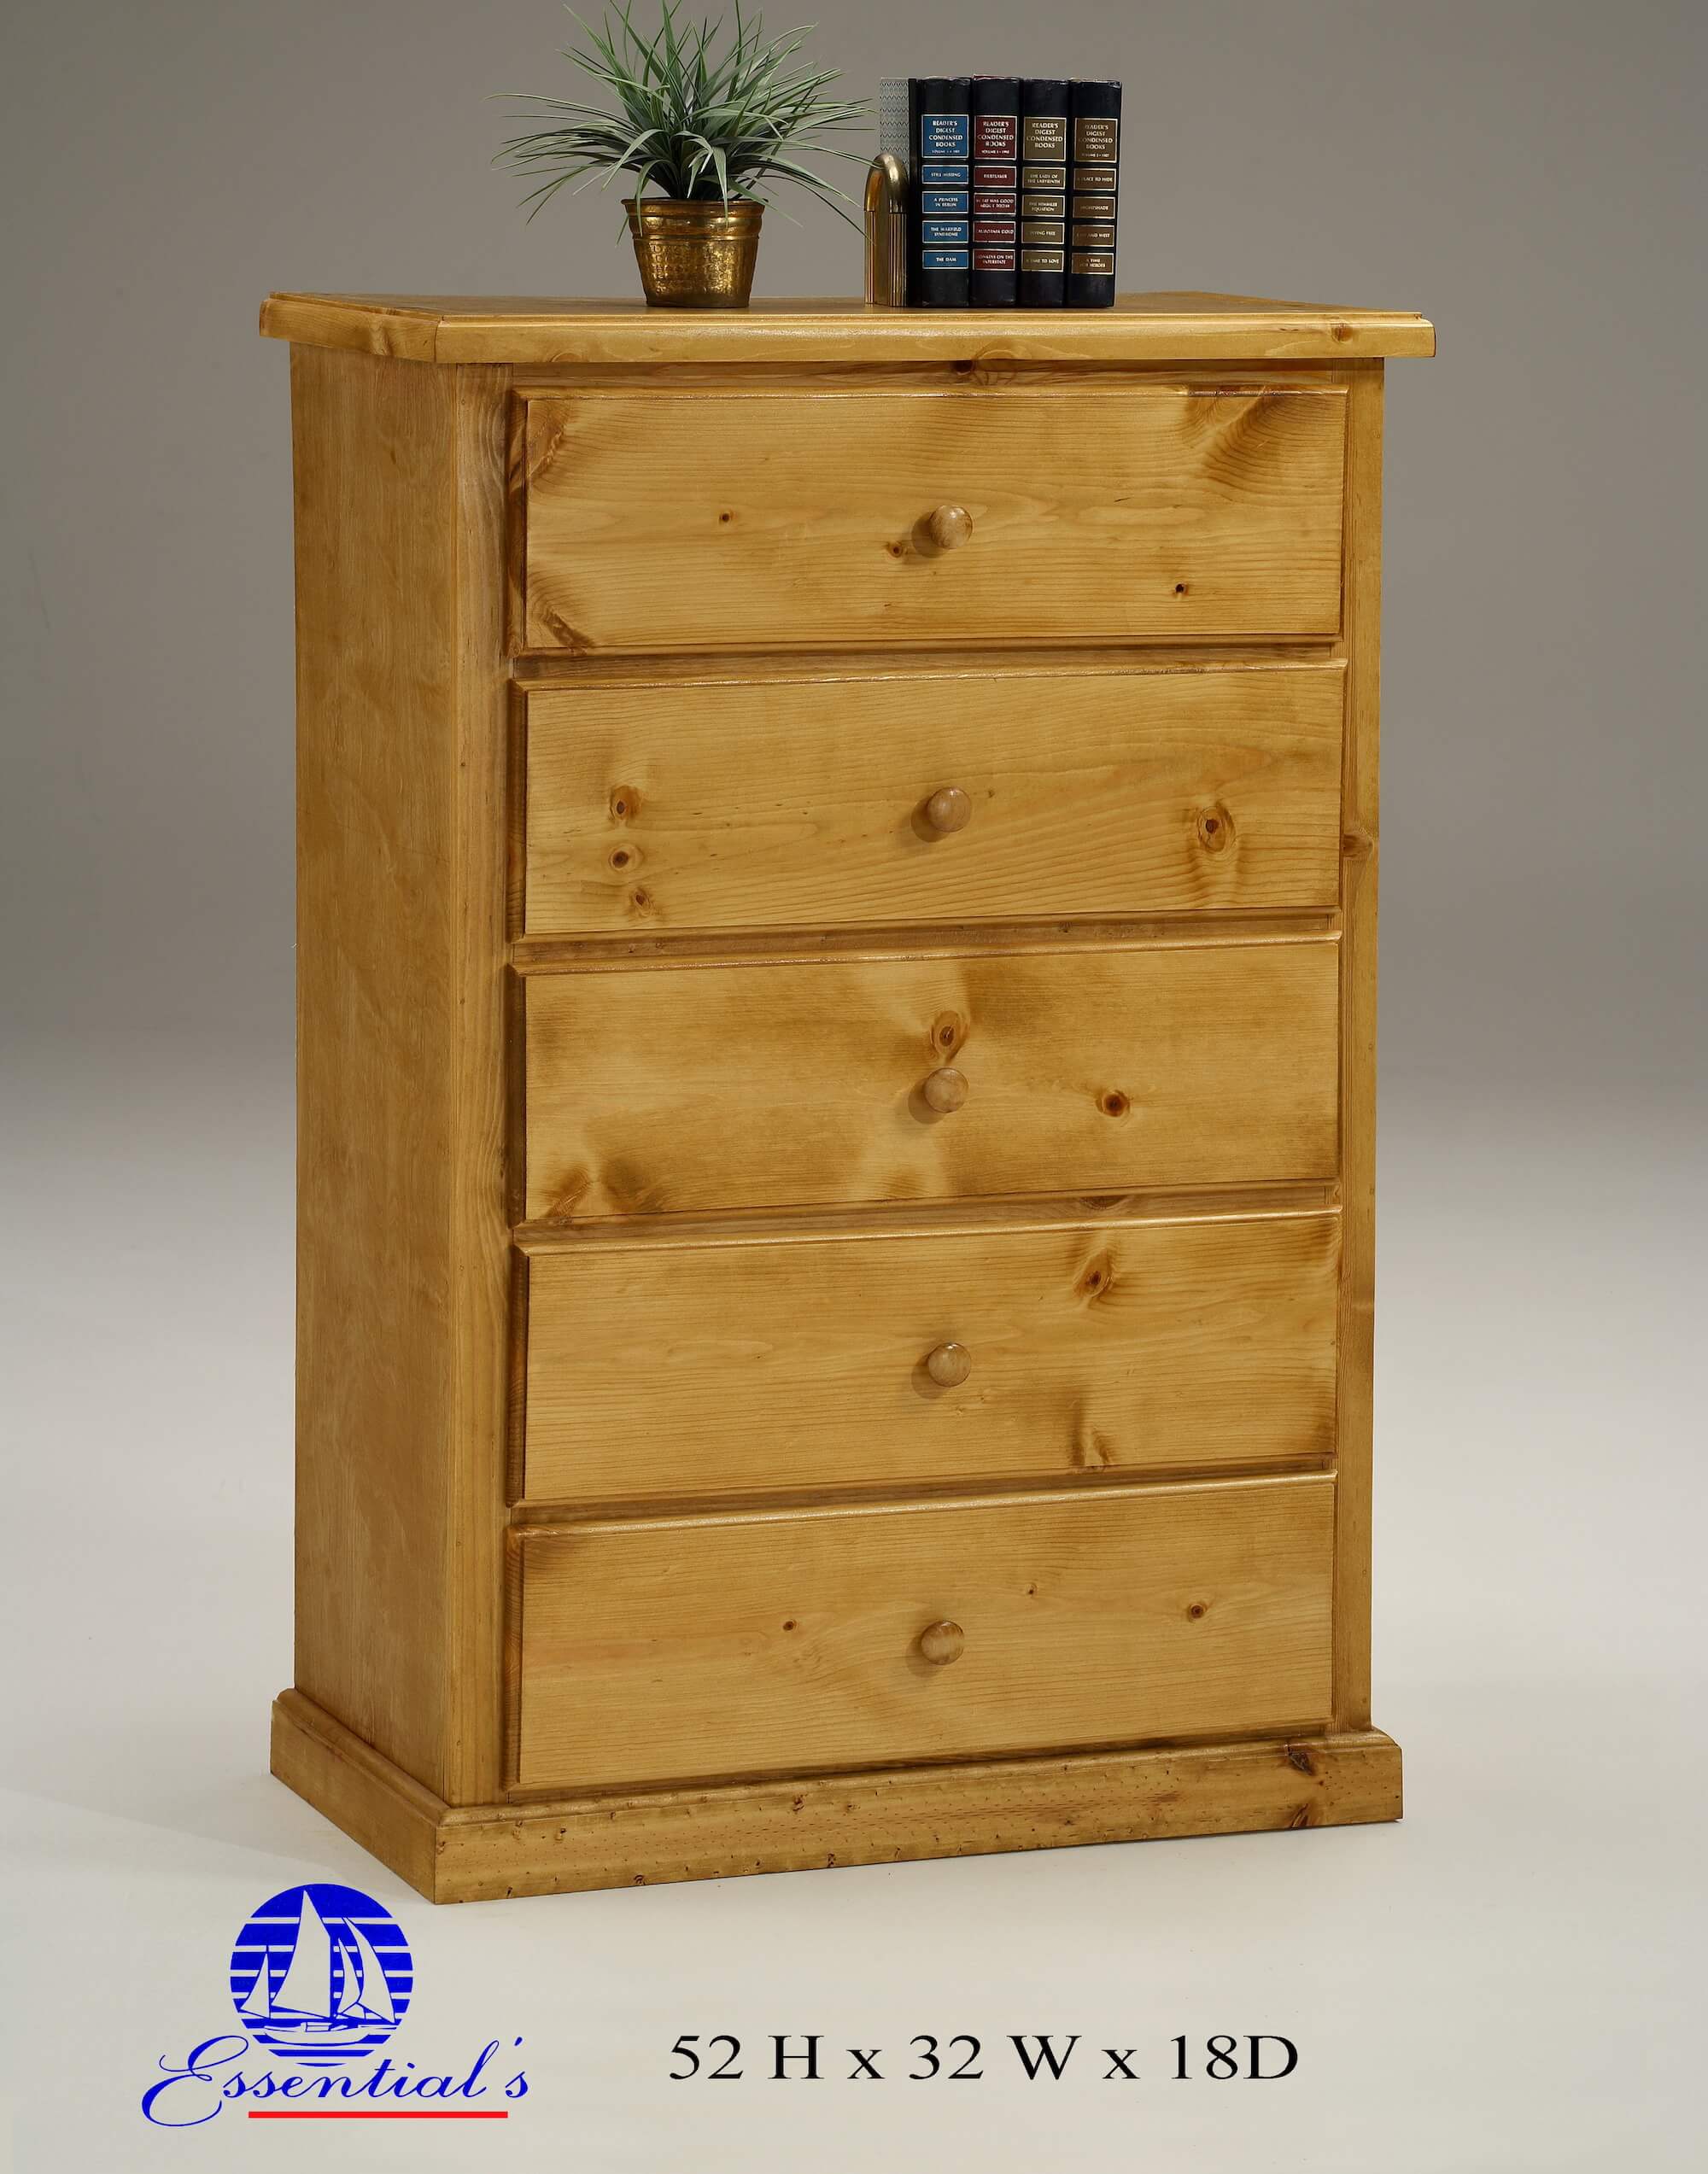 Natural Wood Chest By Essential Furniture product image